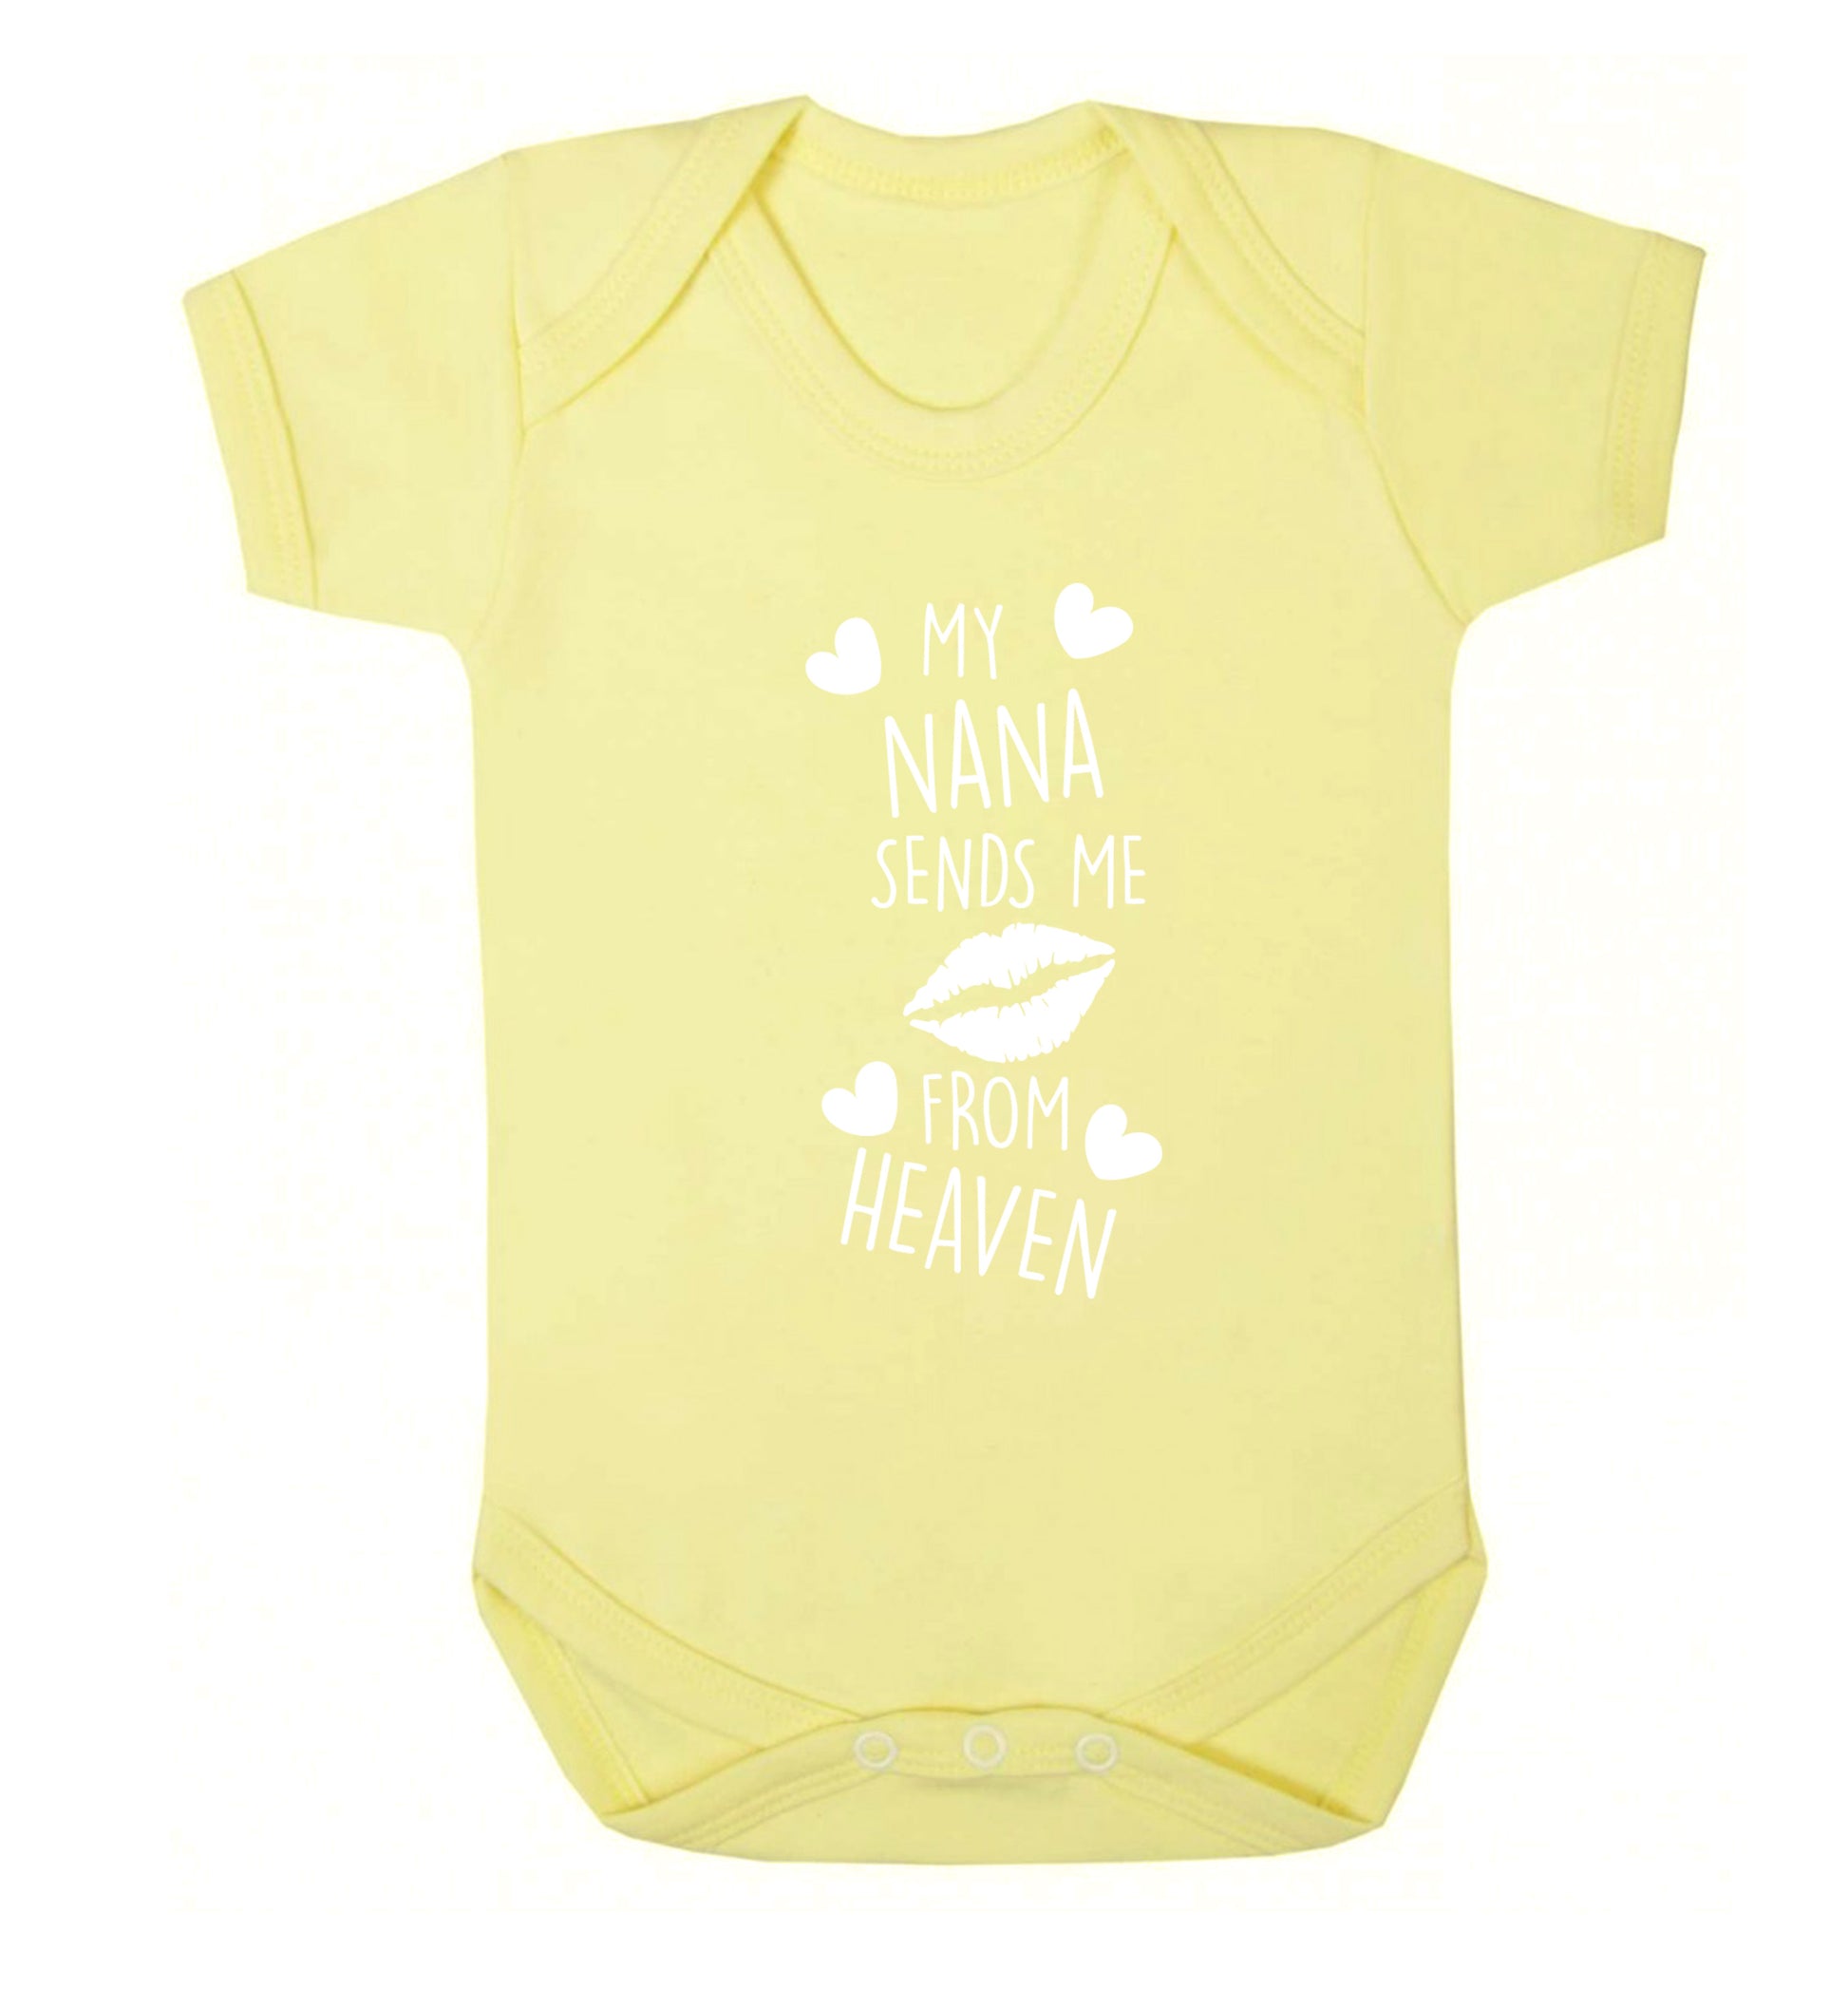 My nana sends me kisses from heaven Baby Vest pale yellow 18-24 months